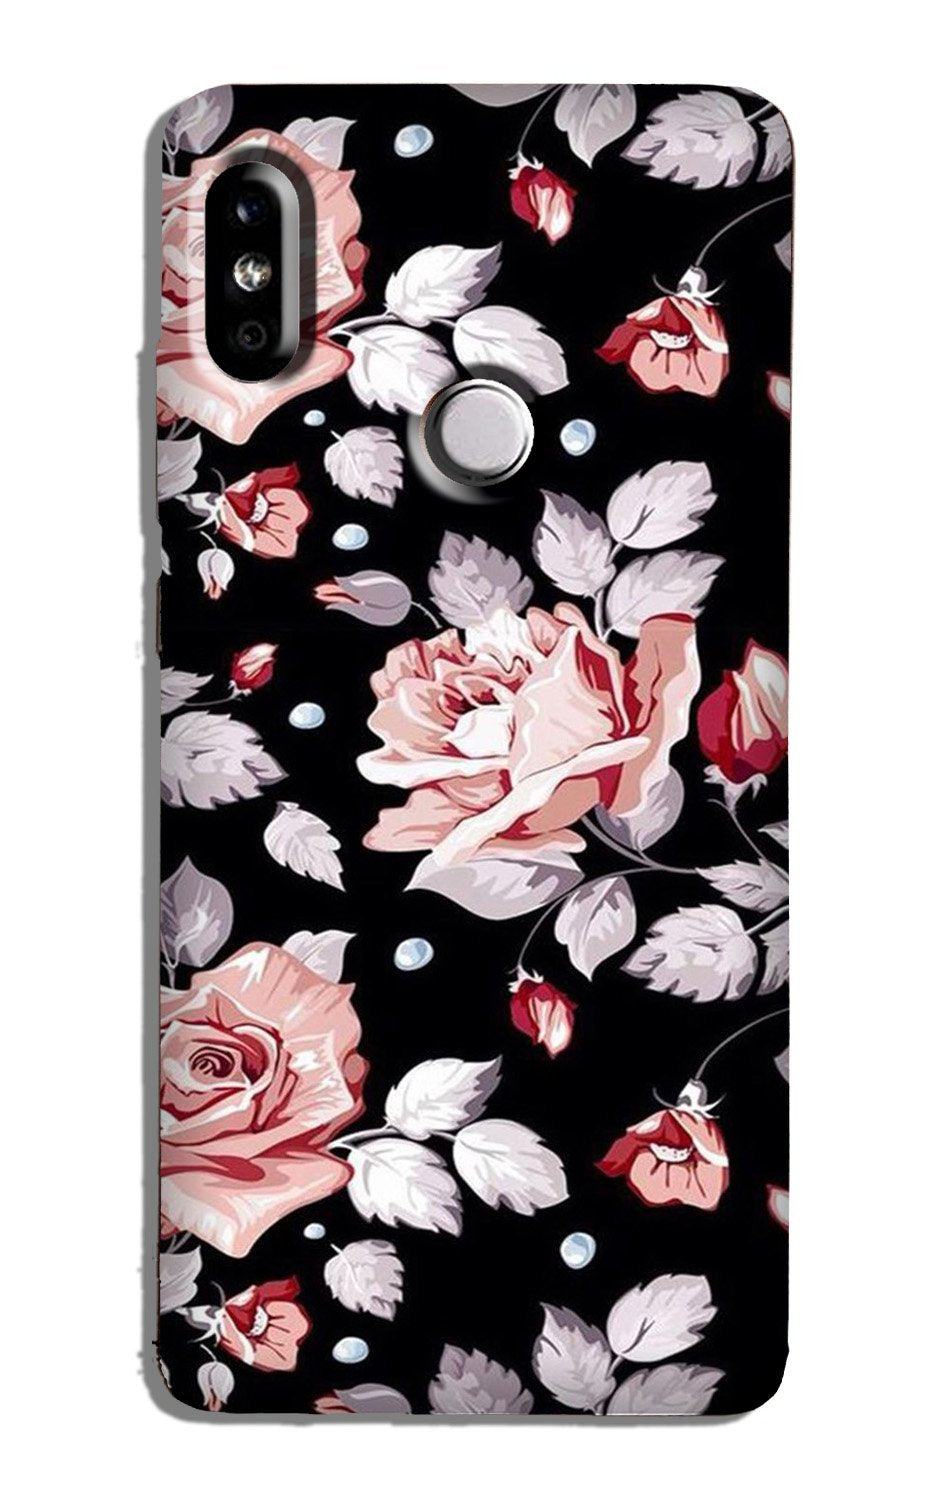 Pink rose Case for Redmi Note 5 Pro